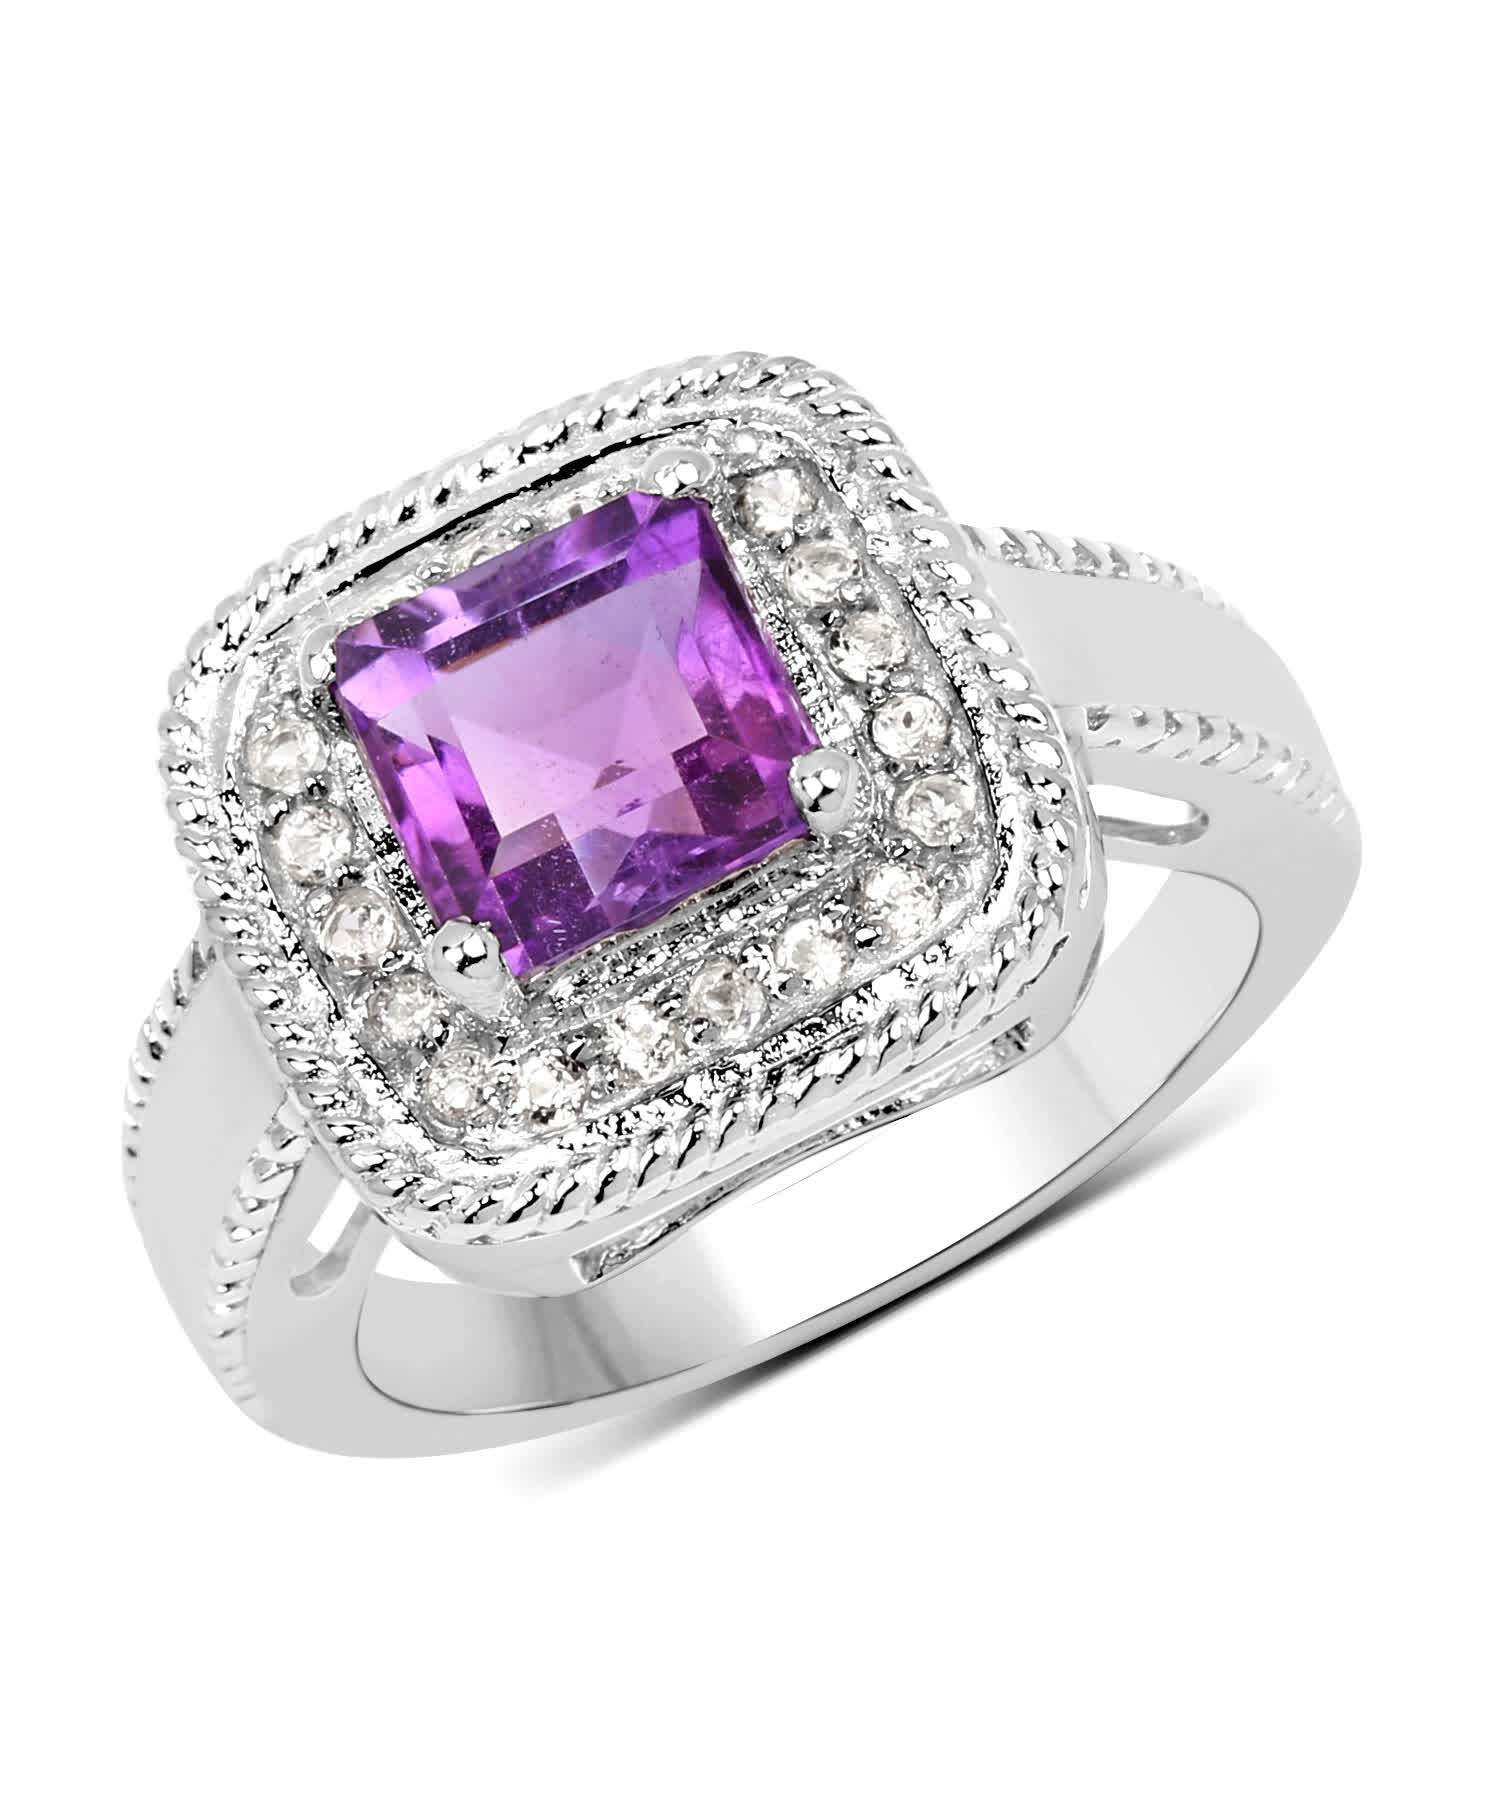 1.80ctw Natural Amethyst and Topaz Rhodium Plated 925 Sterling Silver Fashion Ring View 1